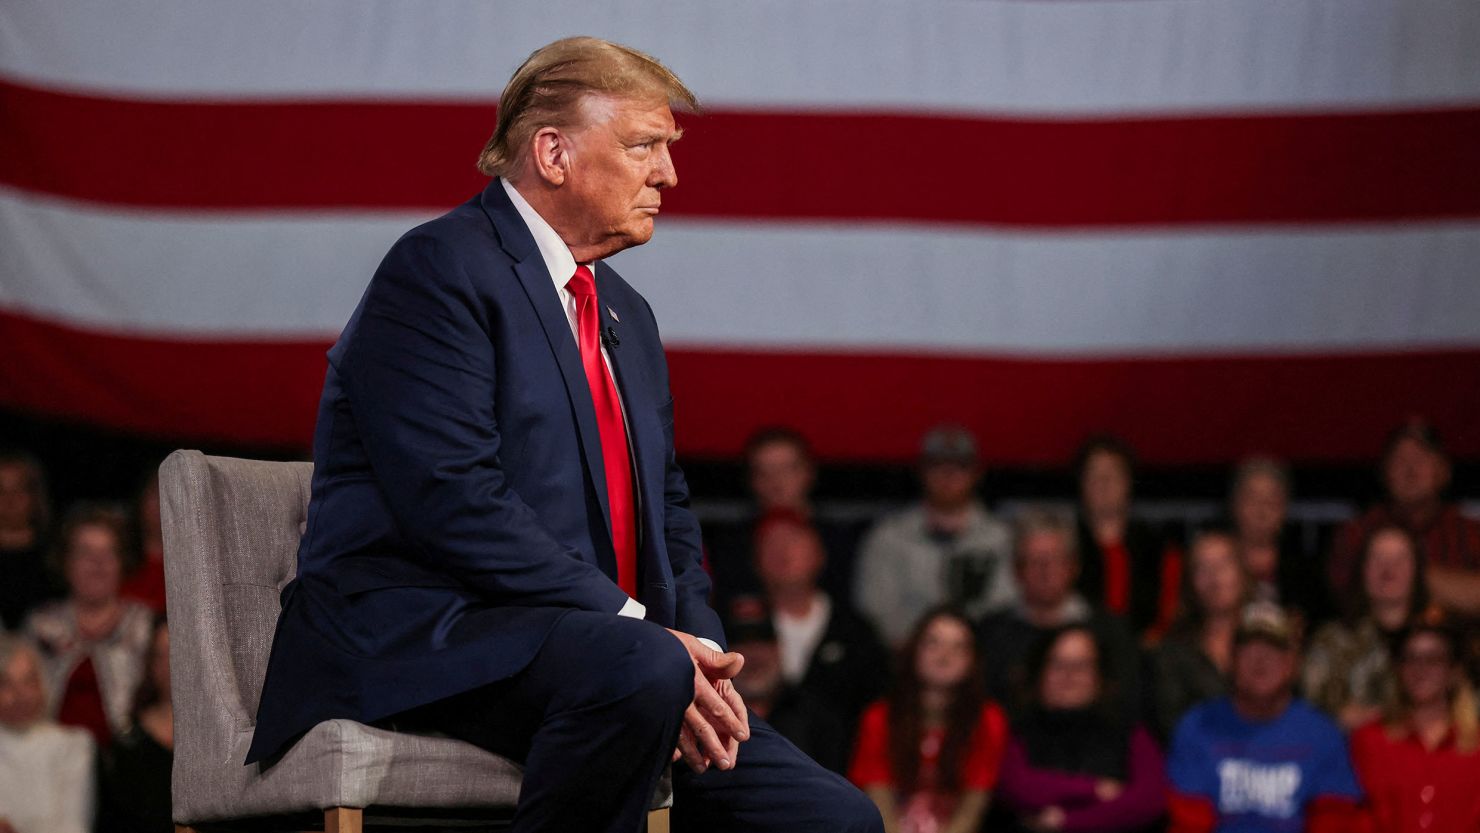 Former President Donald Trump participates in a Fox News town hall with Laura Ingraham in Greenville, South Carolina, on February 20.